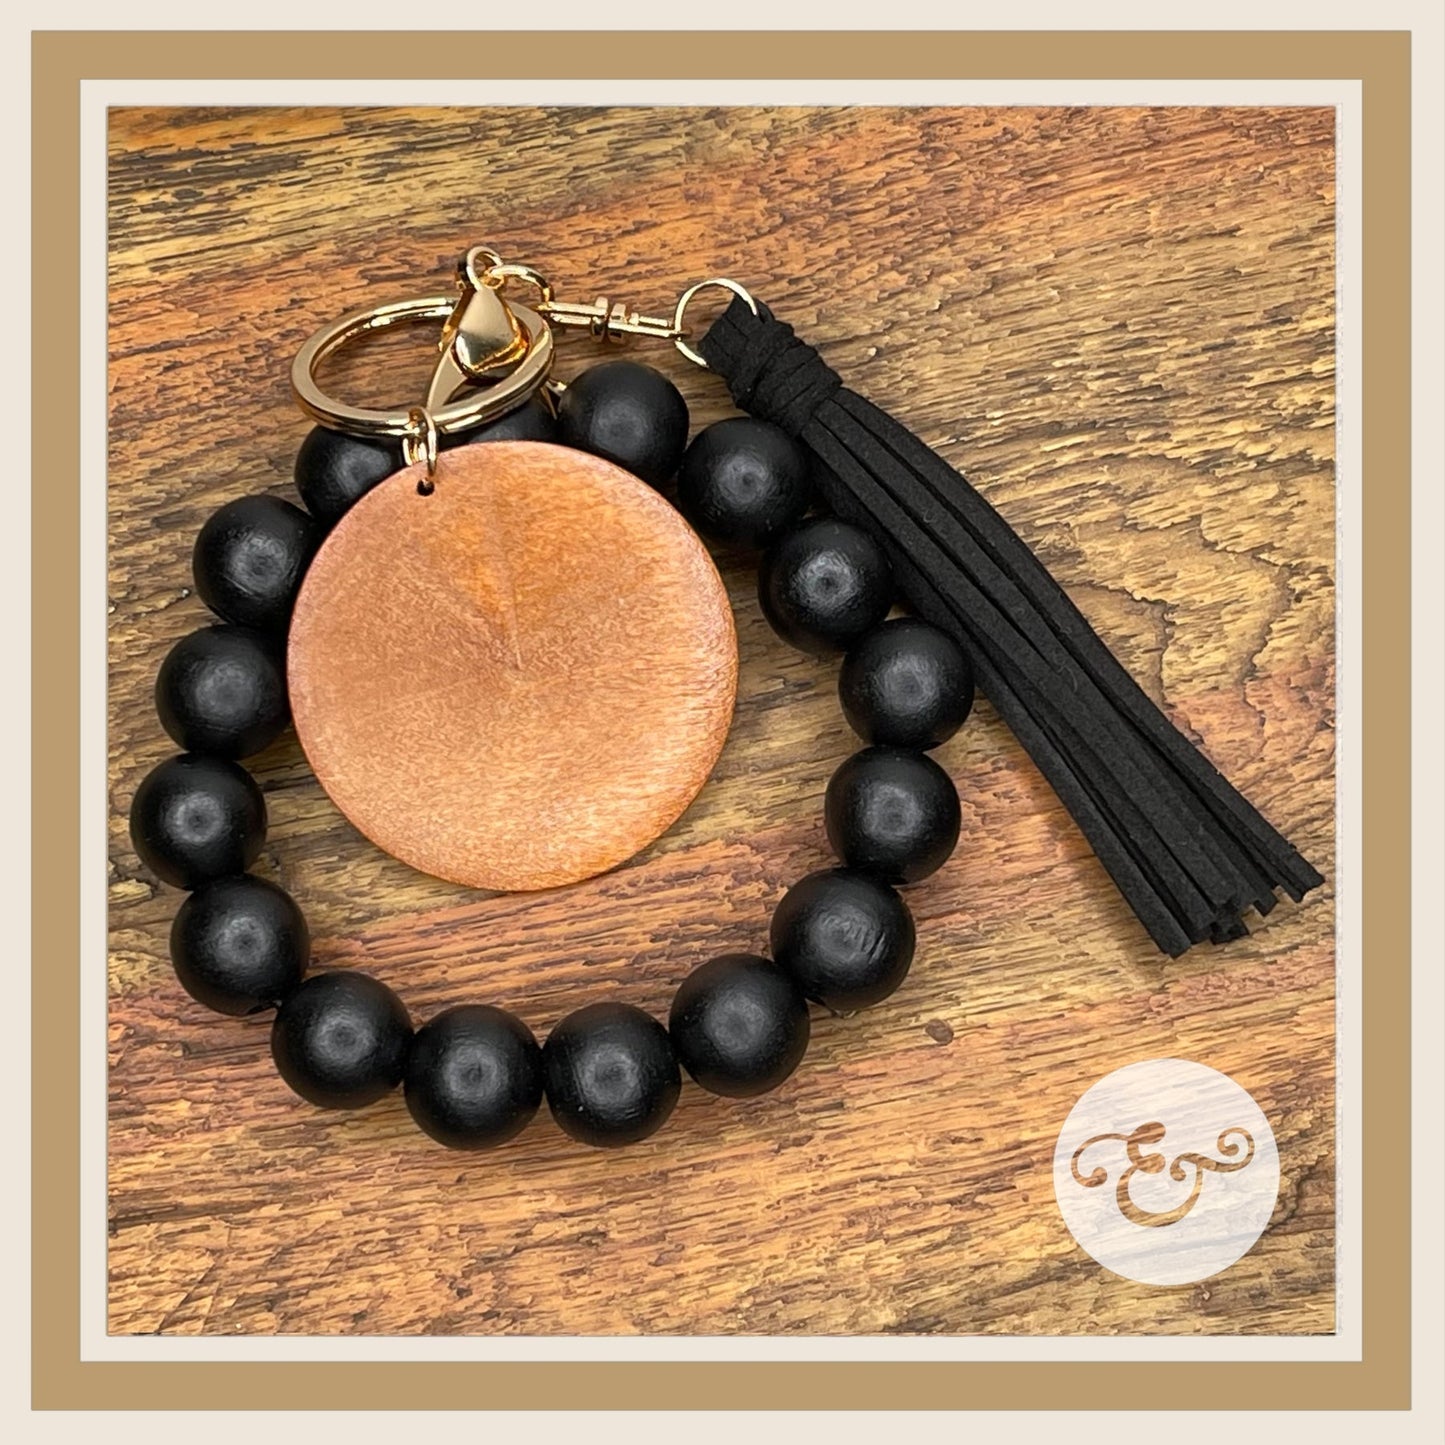 Wooden Bead Wristlets With Suede Tassel (6688691257422) (6688719405134) (6688894517326) (6688895270990) (6690206974030) (6690209235022)